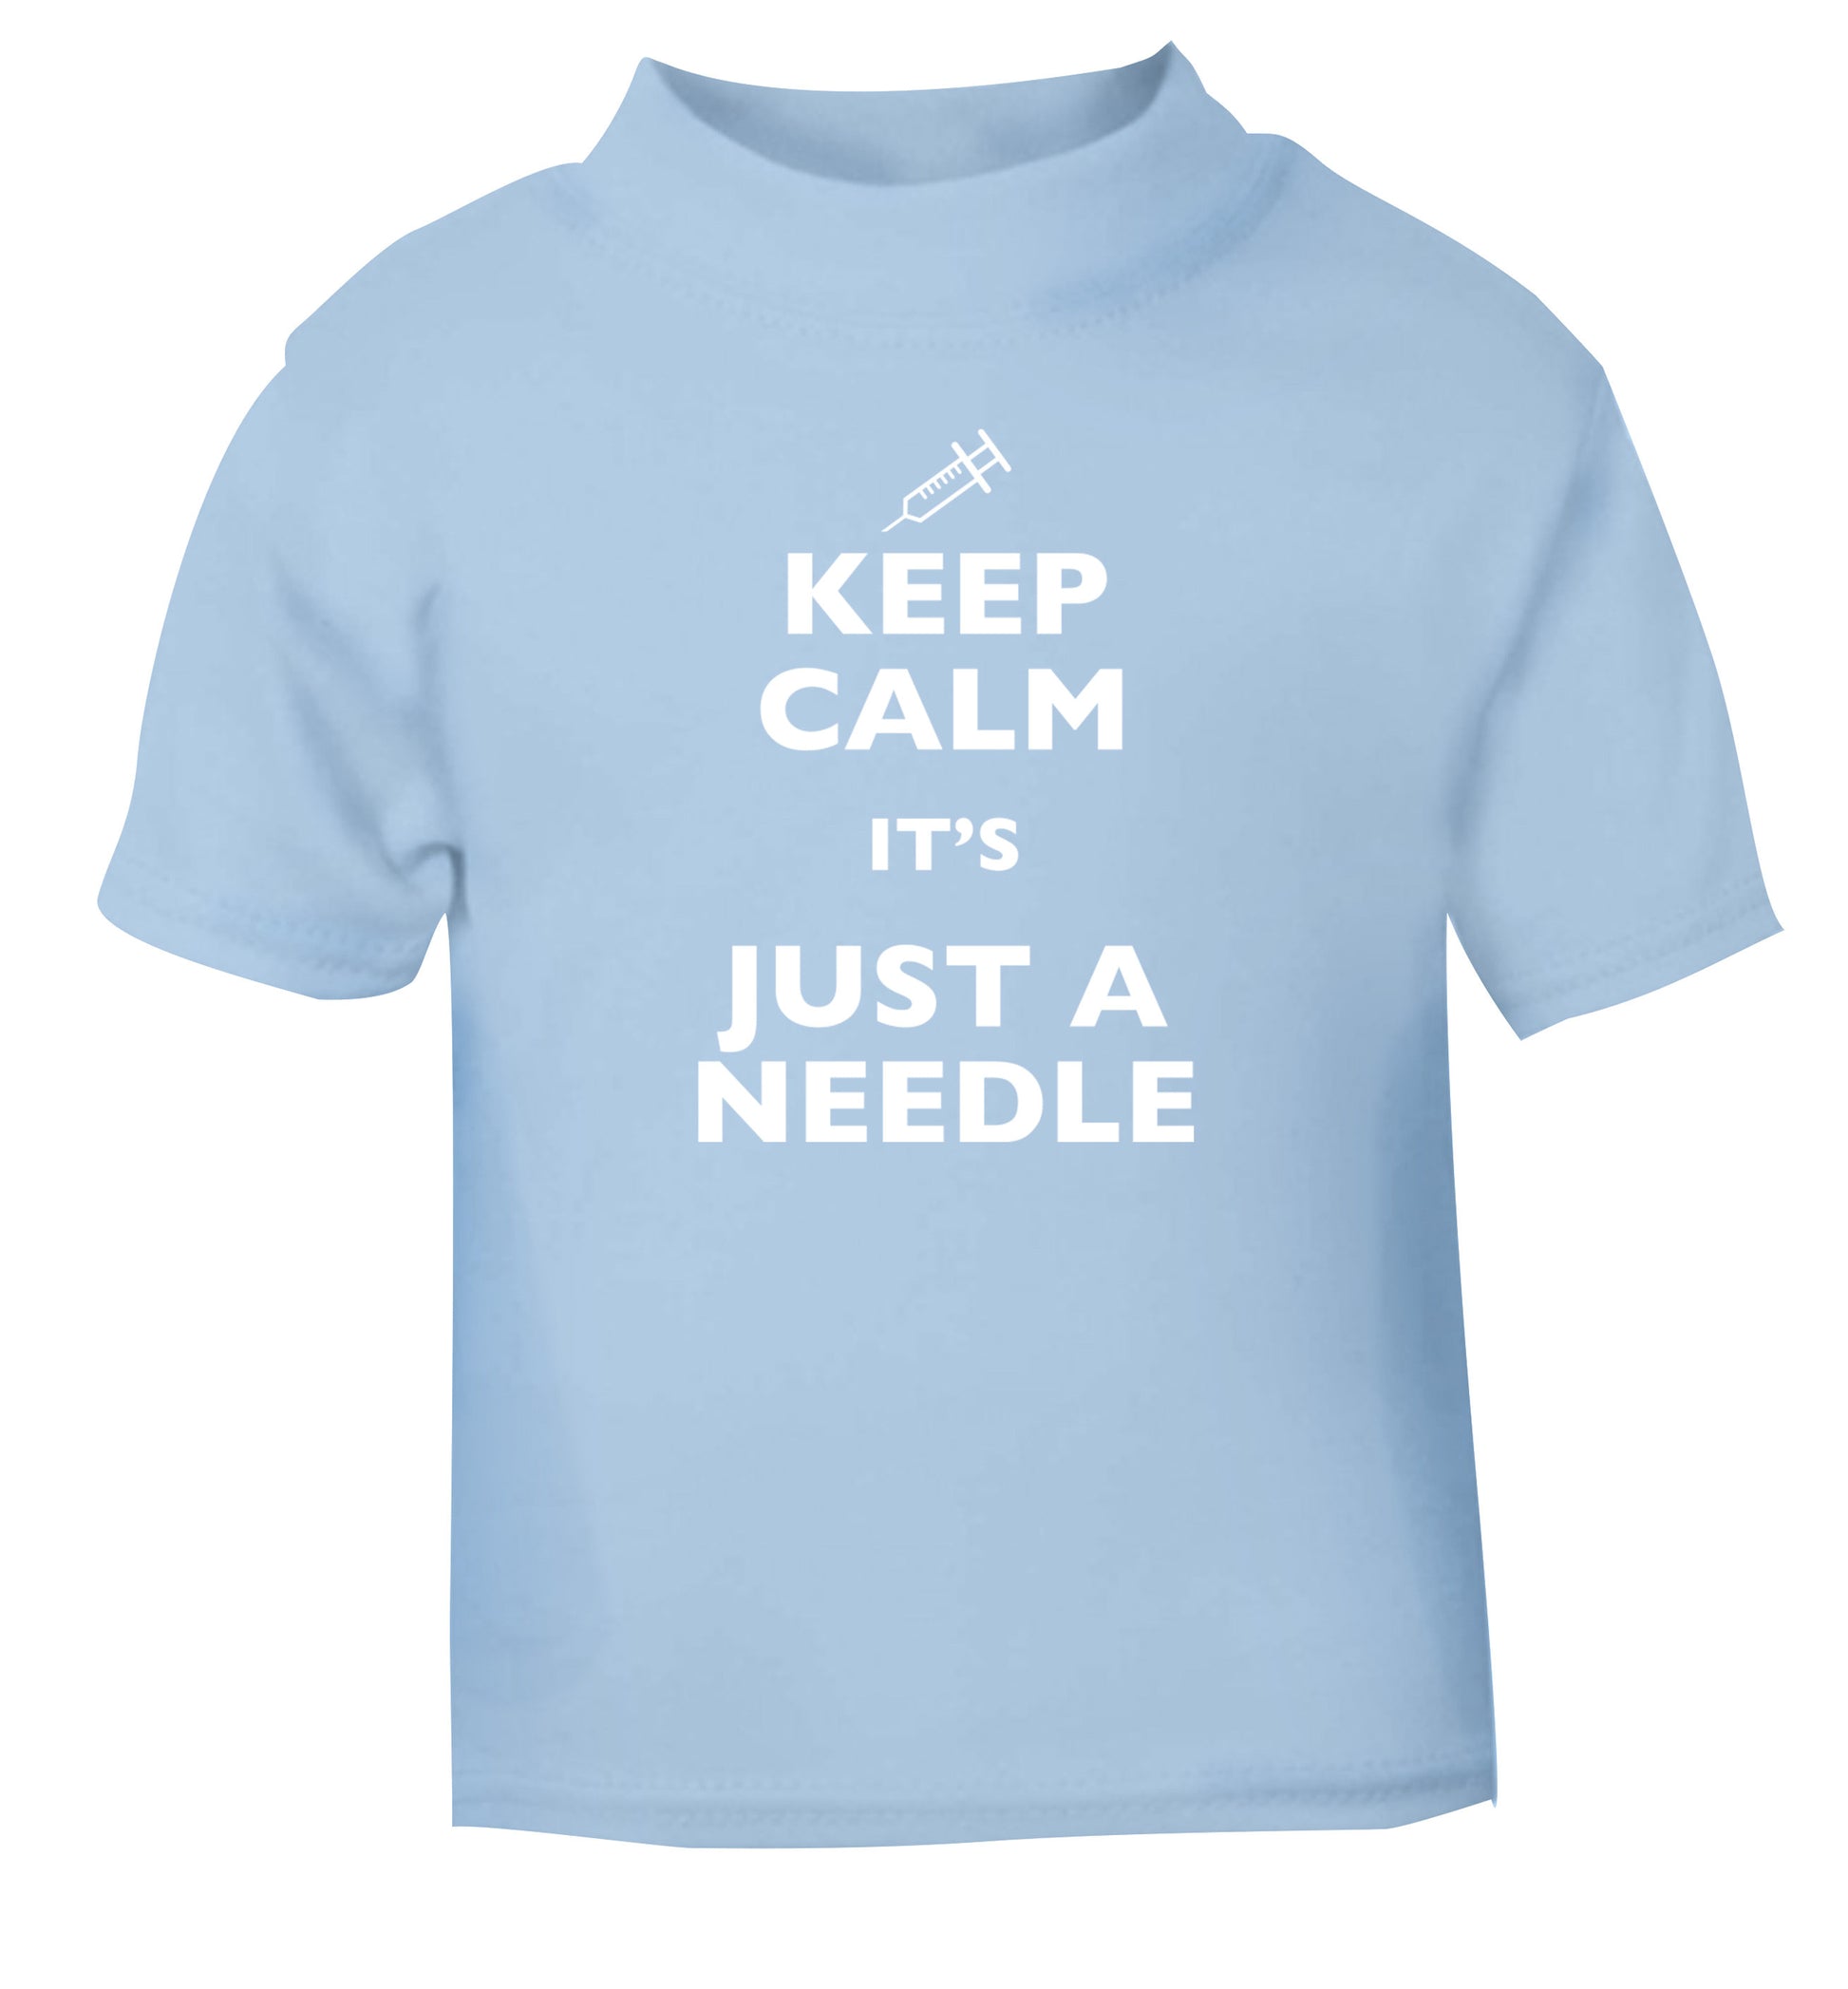 Keep calm it's only a needle light blue Baby Toddler Tshirt 2 Years